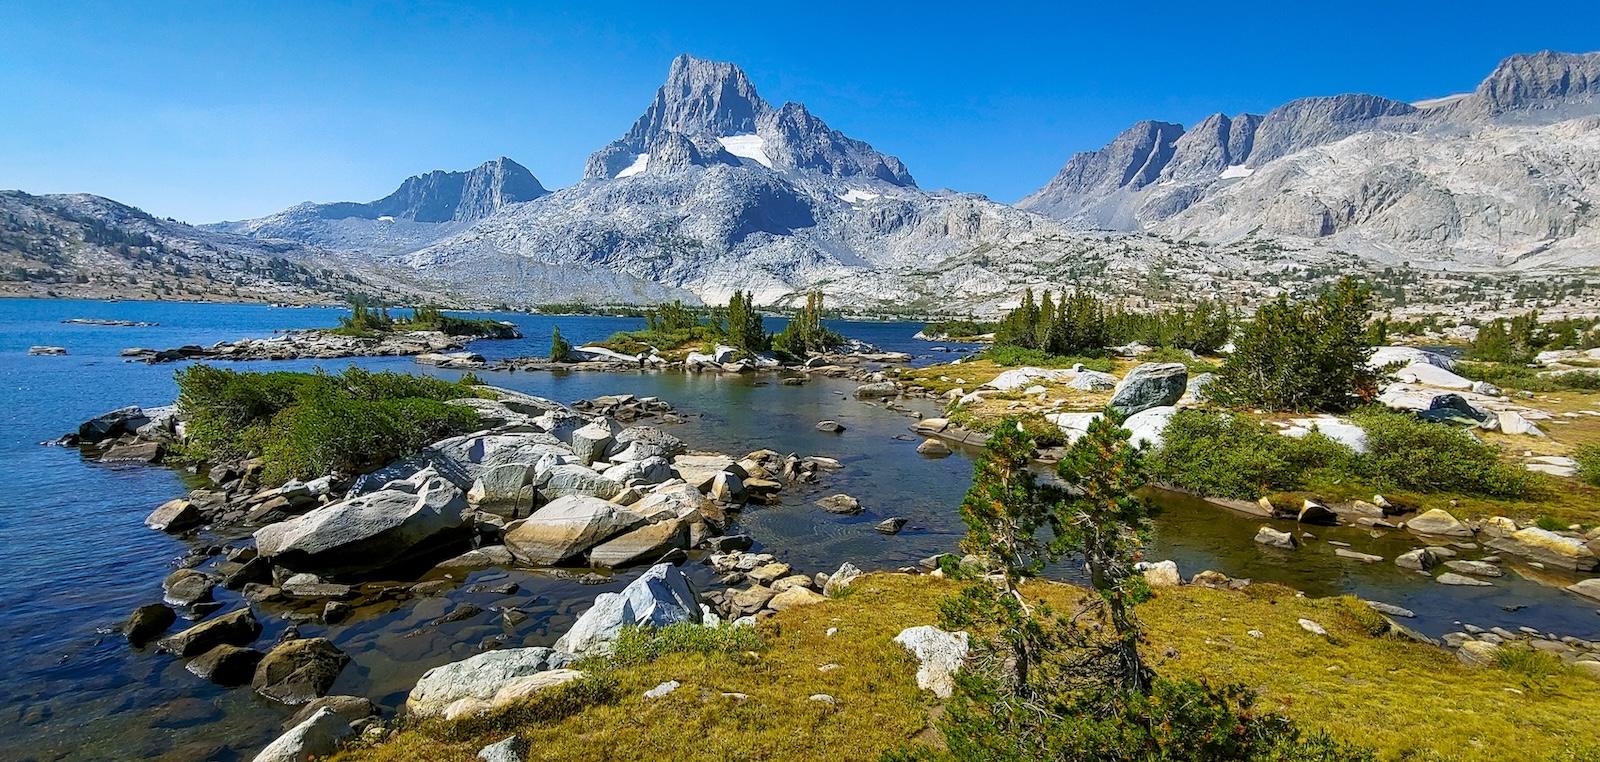 The shoreline of Thousand Island Lake in the Sierras